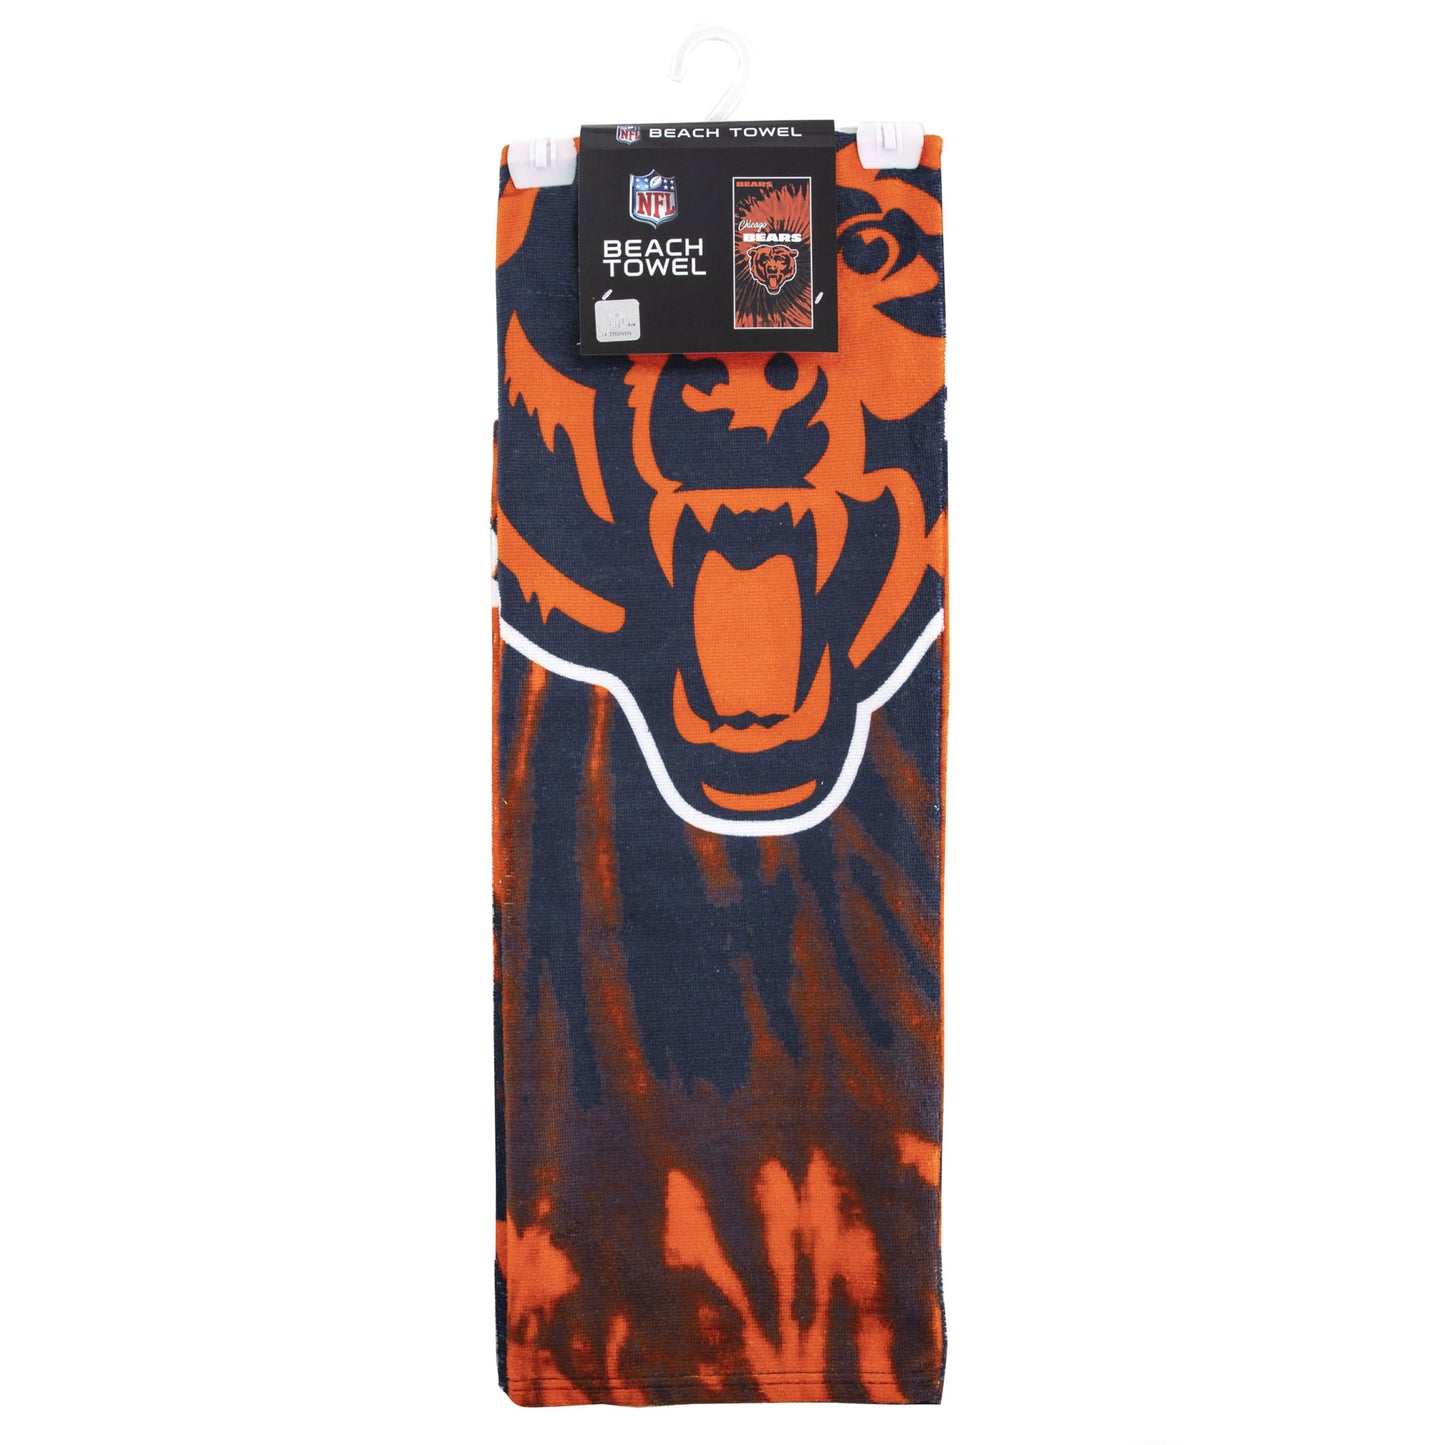 Bears OFFICIAL NFL "Psychedelic" Beach Towel; 30" x 60"